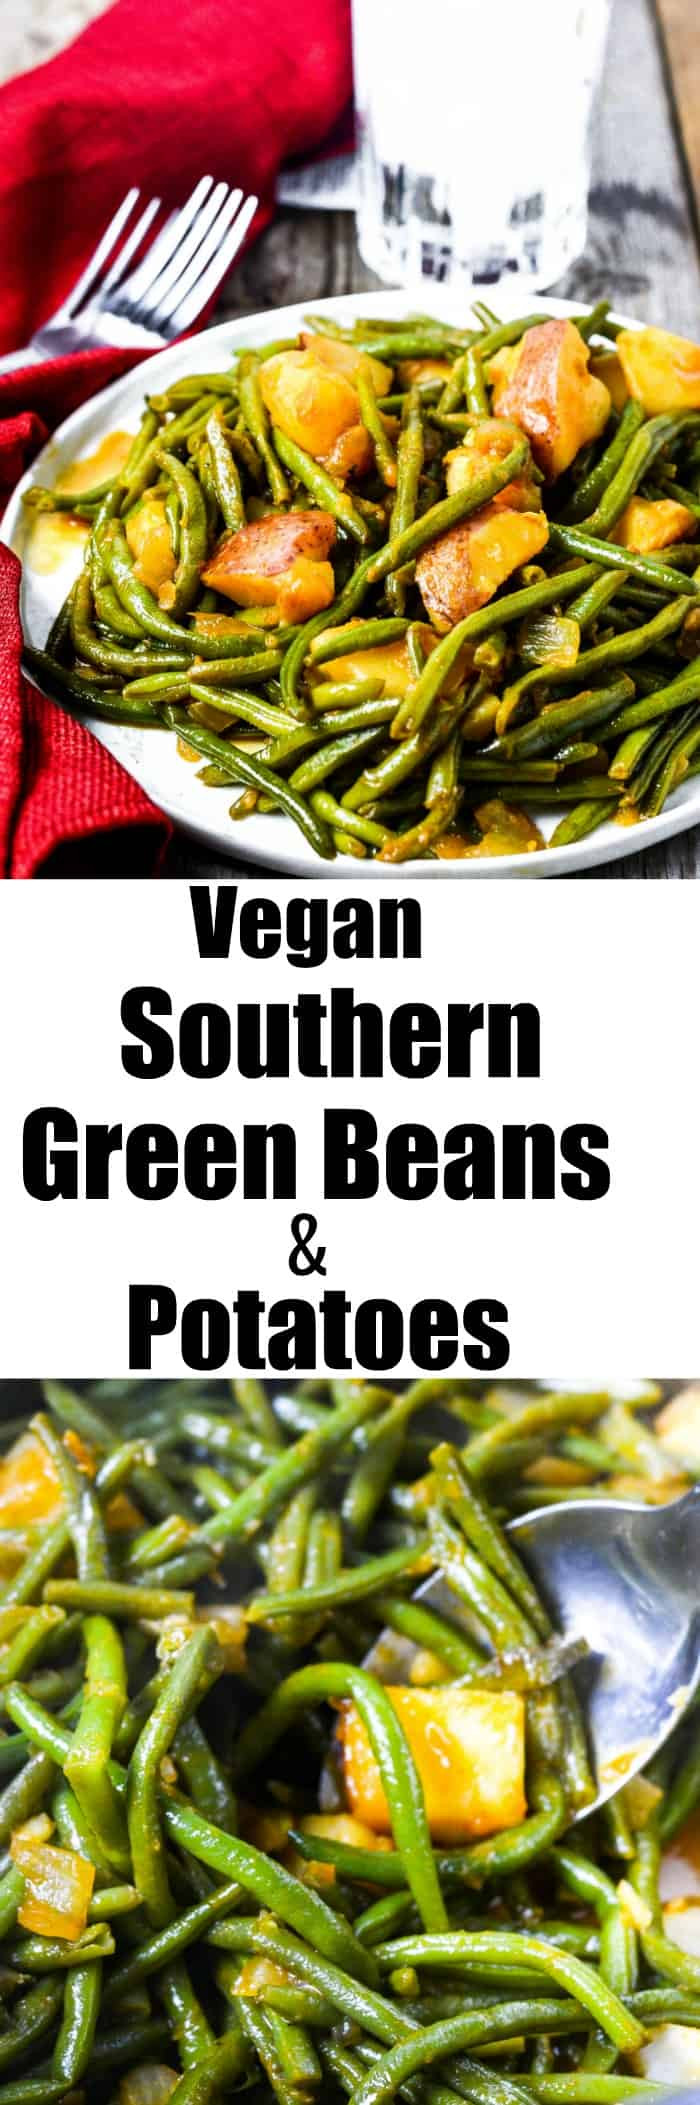 Beans Greens Potatoes
 Vegan Southern Green Beans and Potatoes Healthier Steps